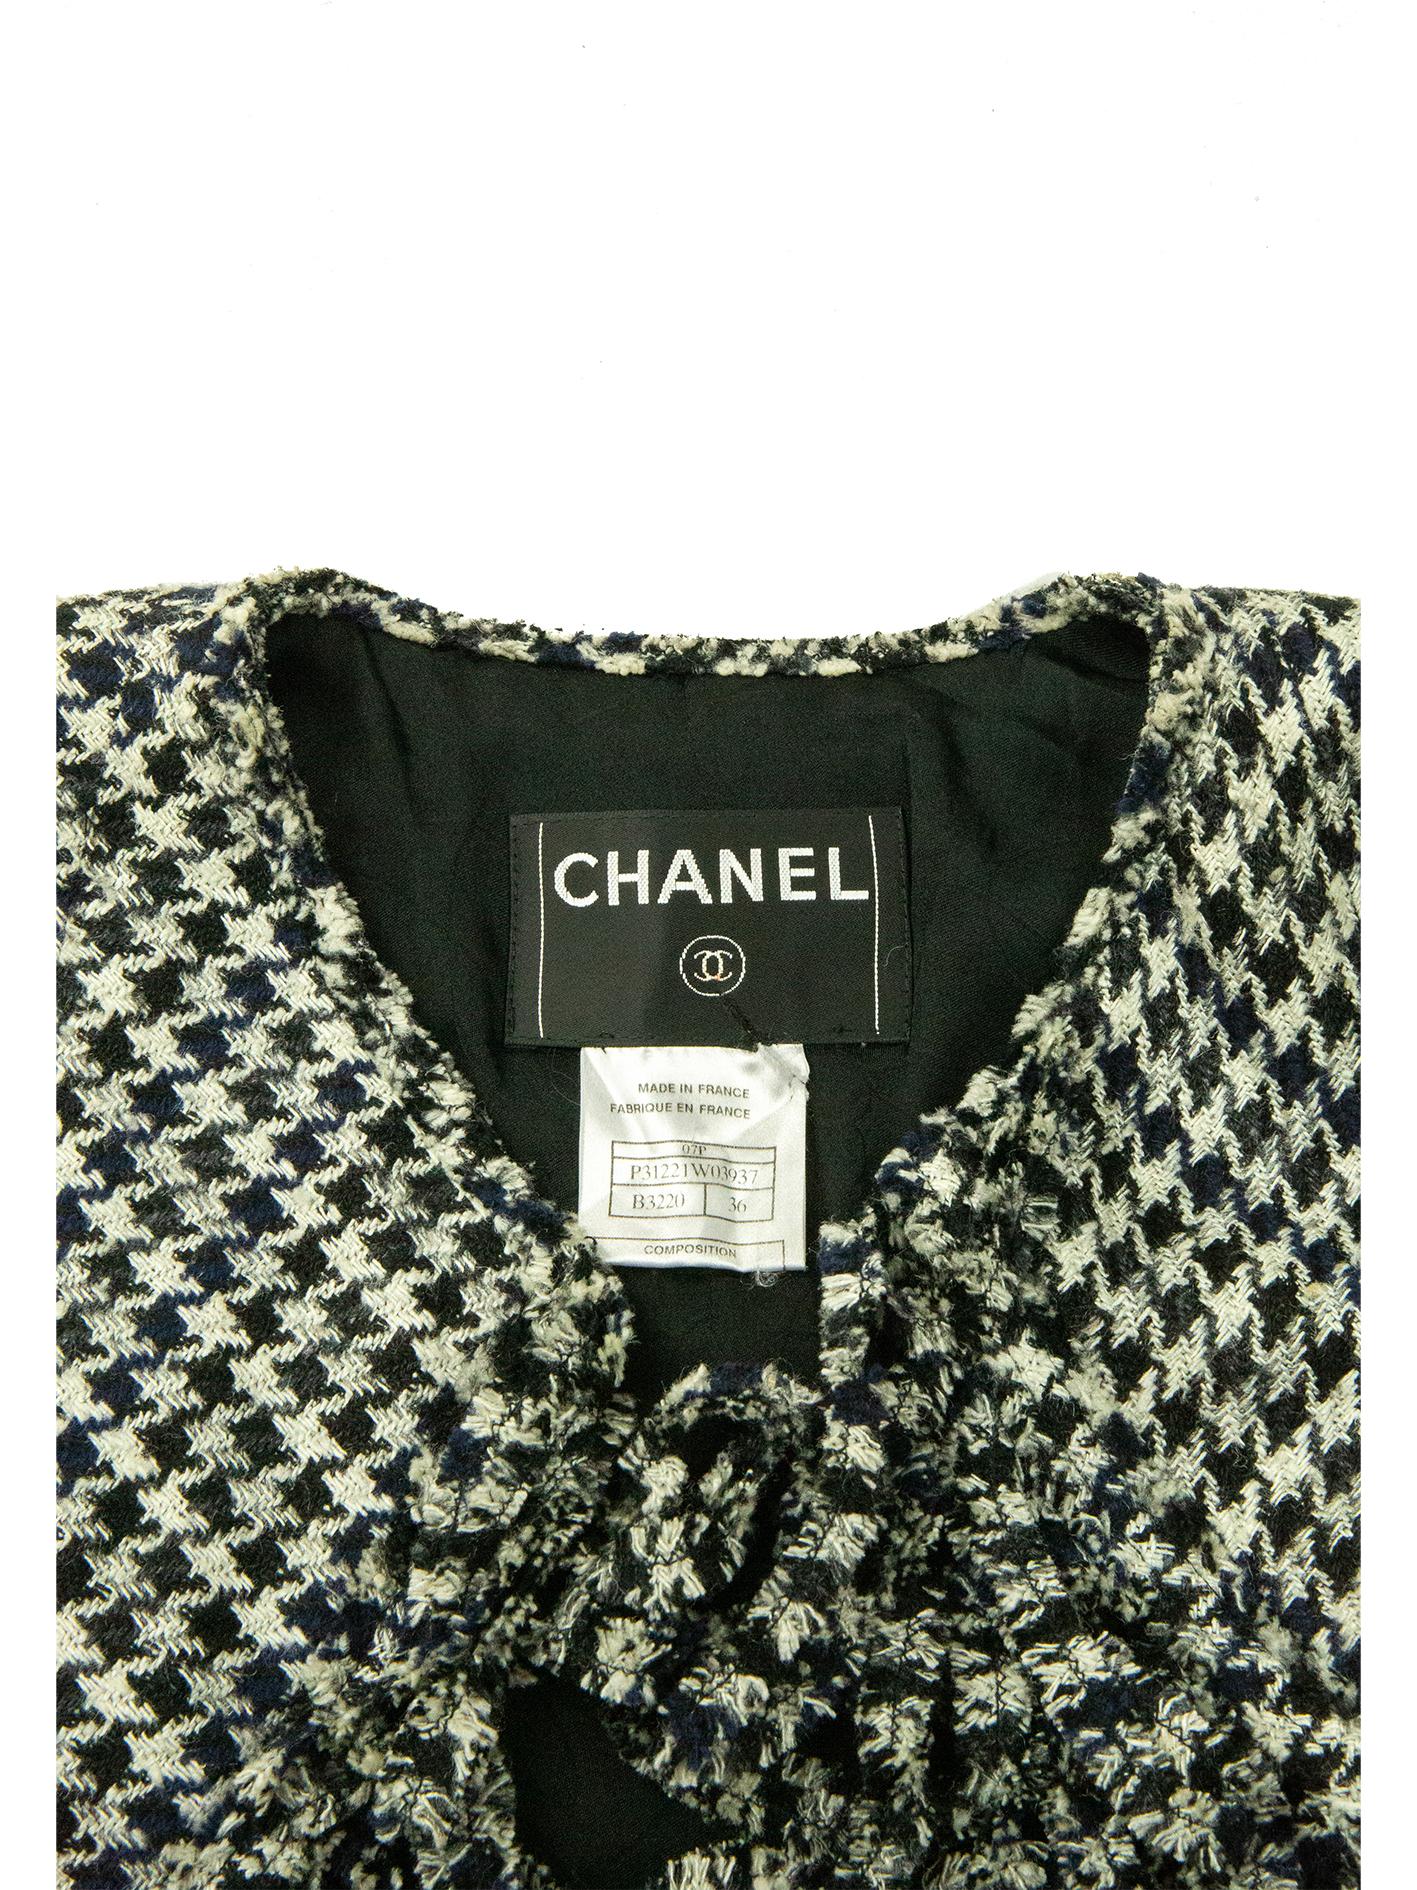 Chanel Spring 2007 Dogtooth Jacket For Sale 1